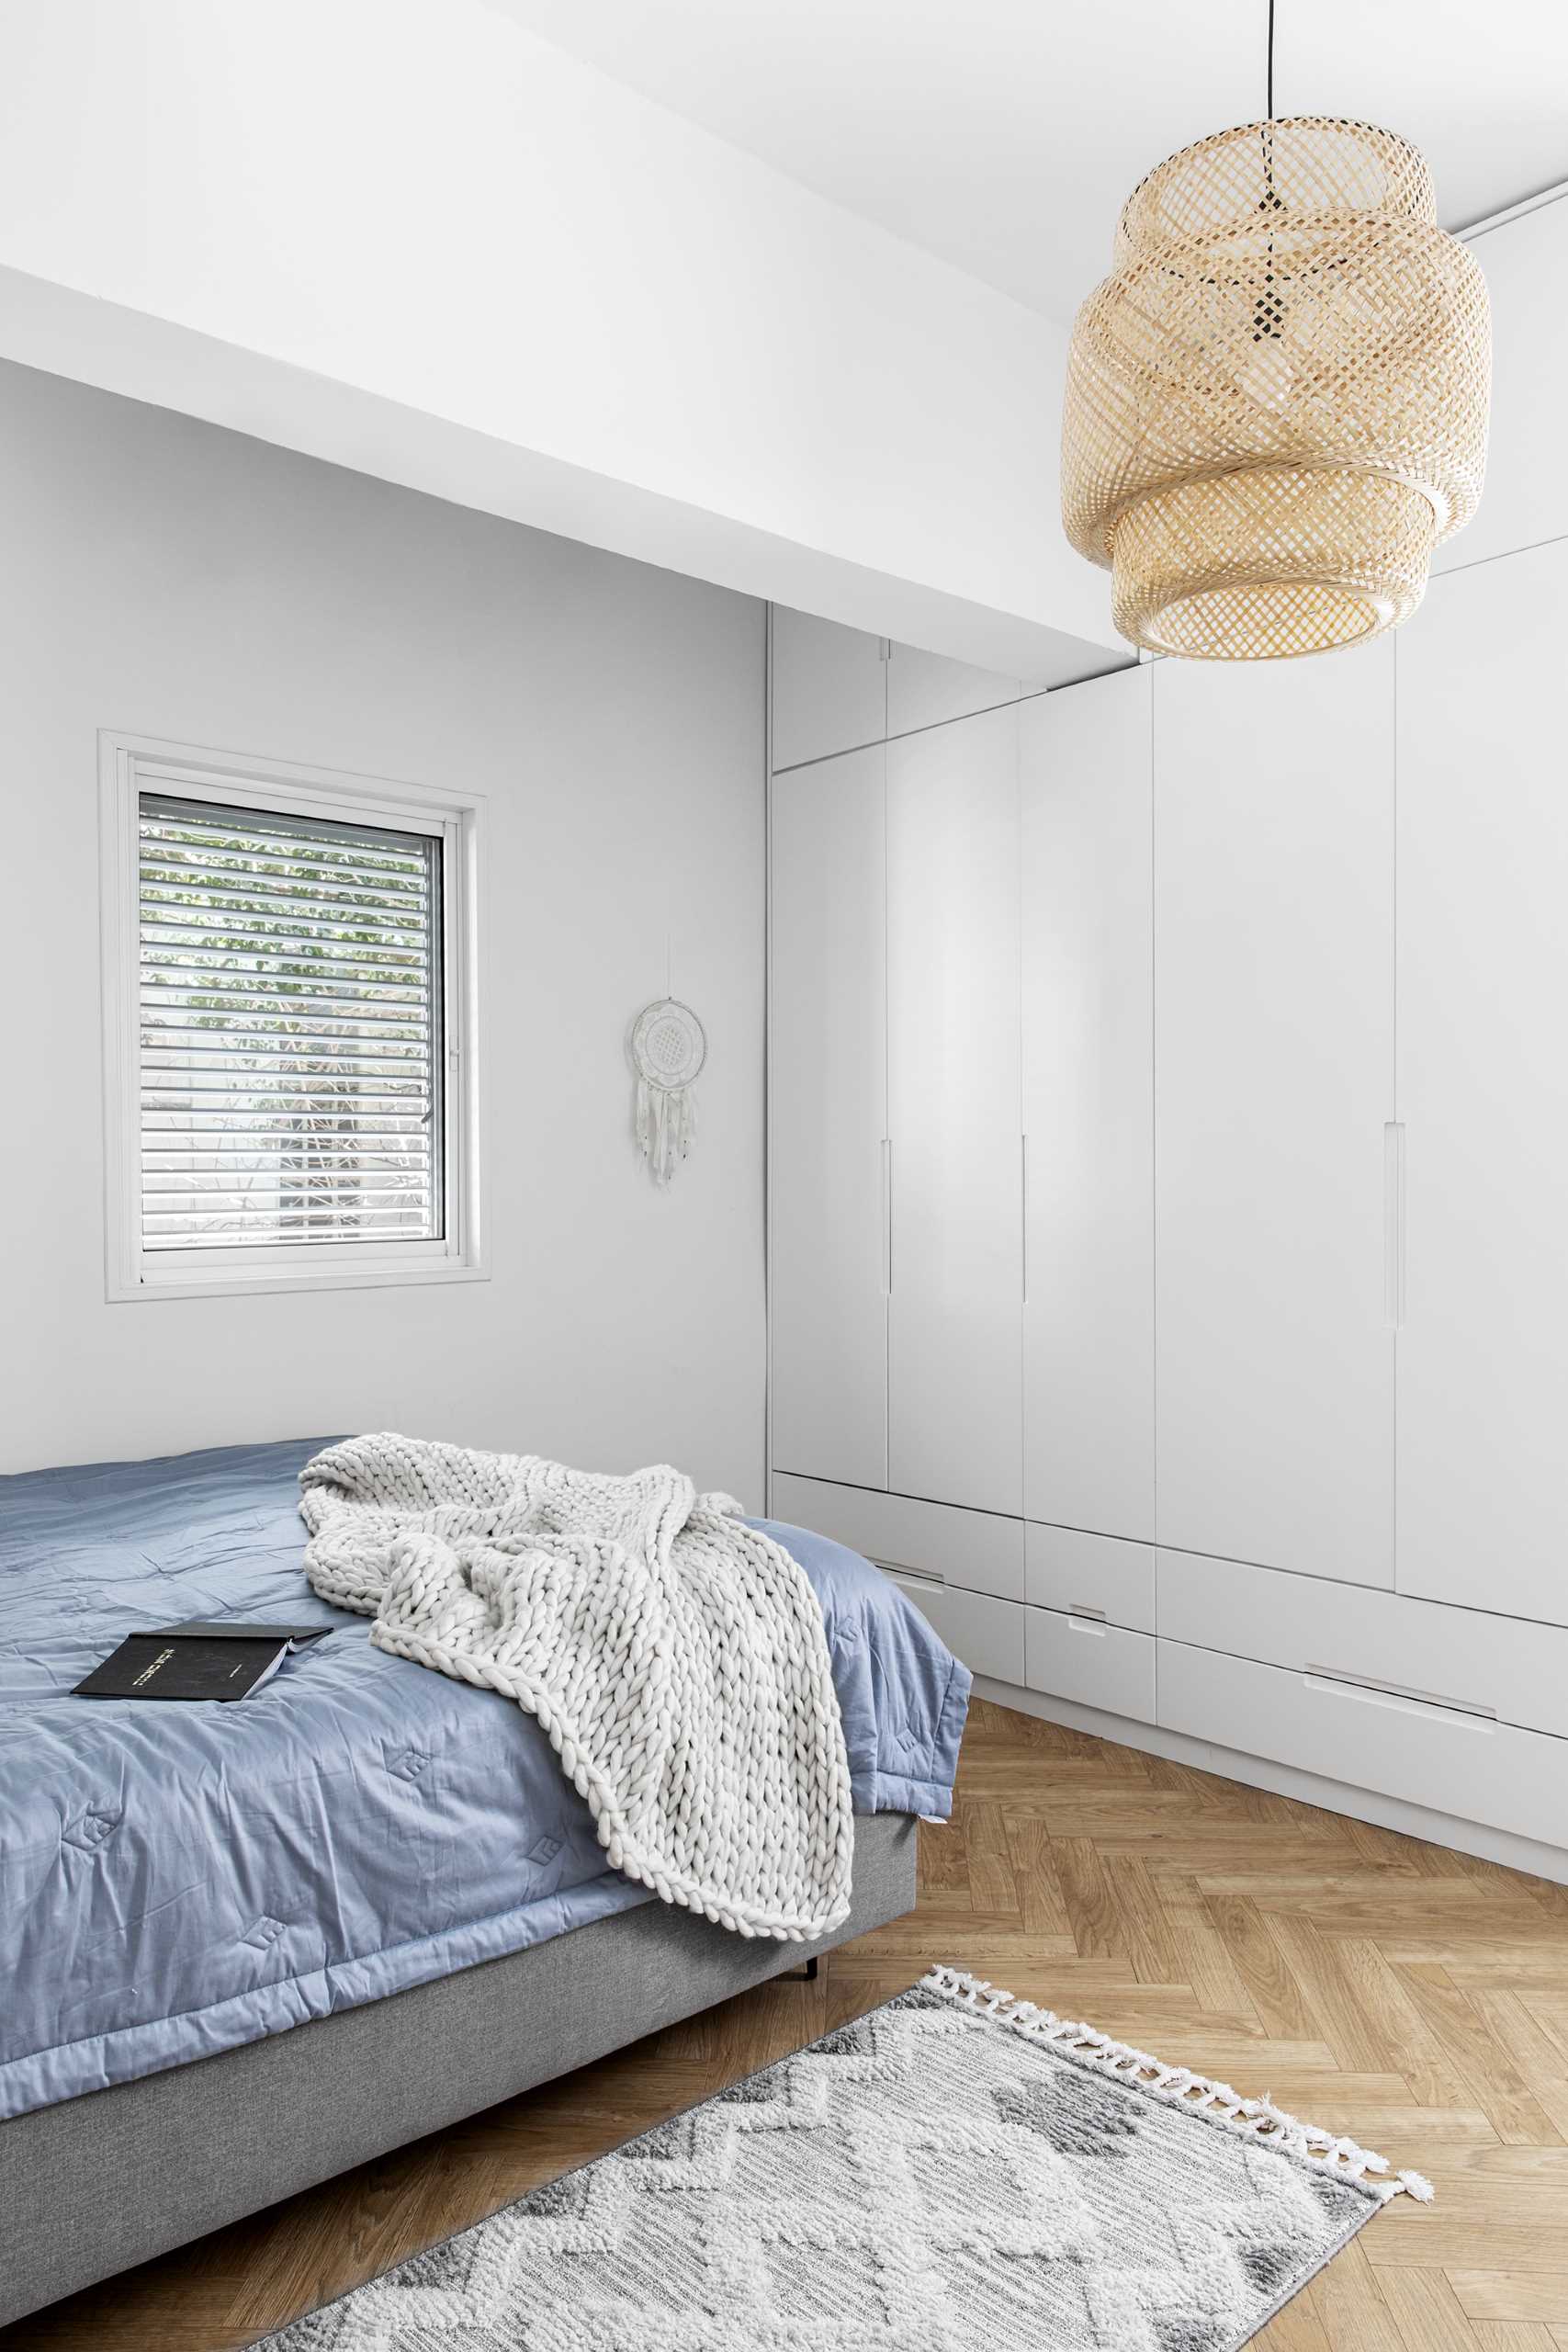 In this modern bedroom, there's floor-to-ceiling closets.